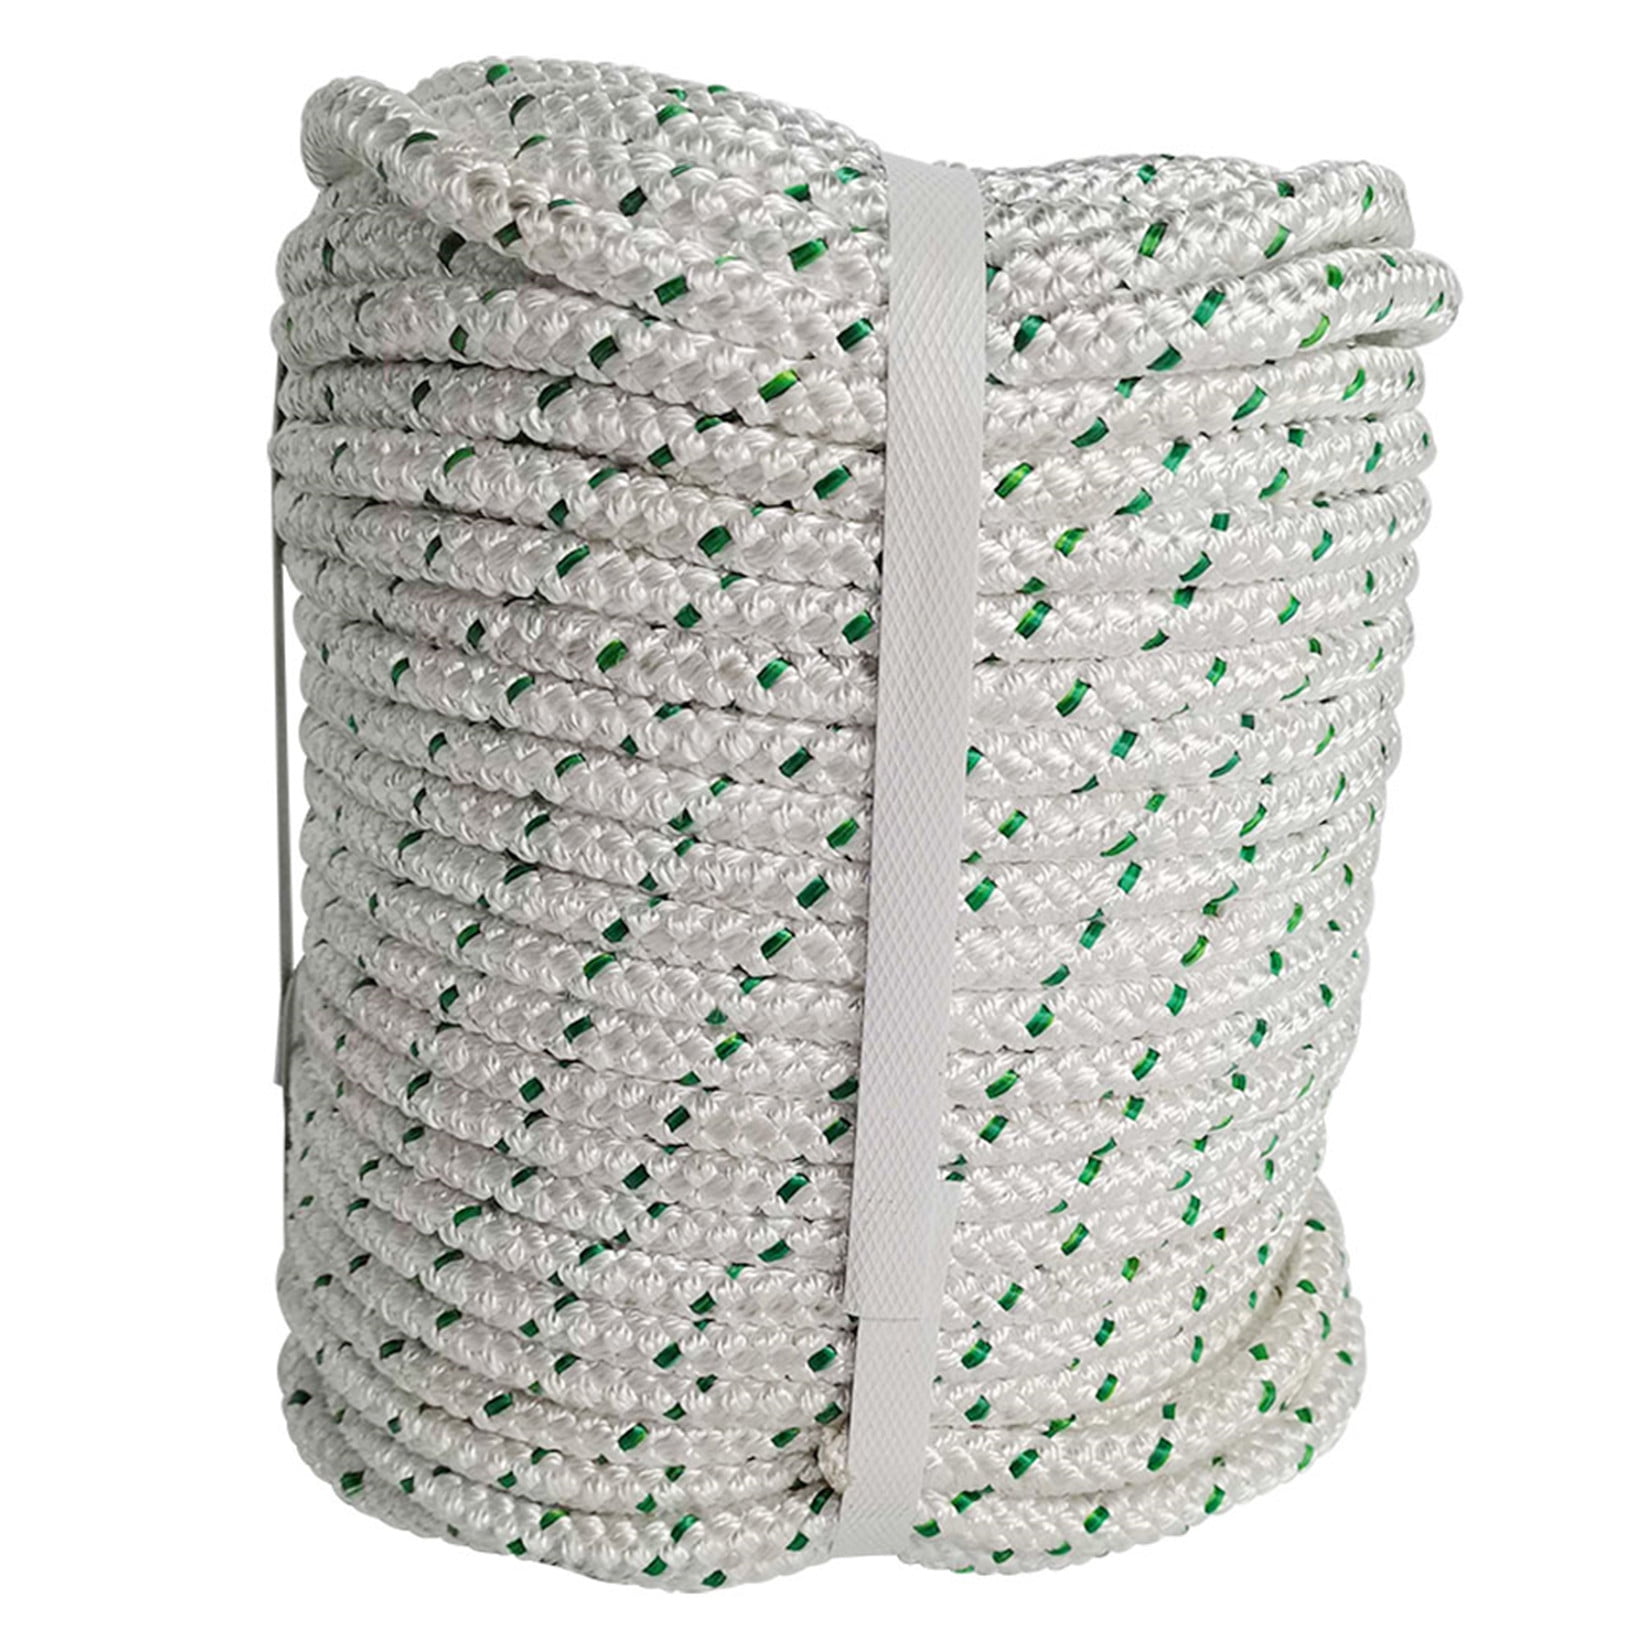 100FT Double Braid Polyester Rope 3/8 4800Lbs BREAKING STRENGTH 